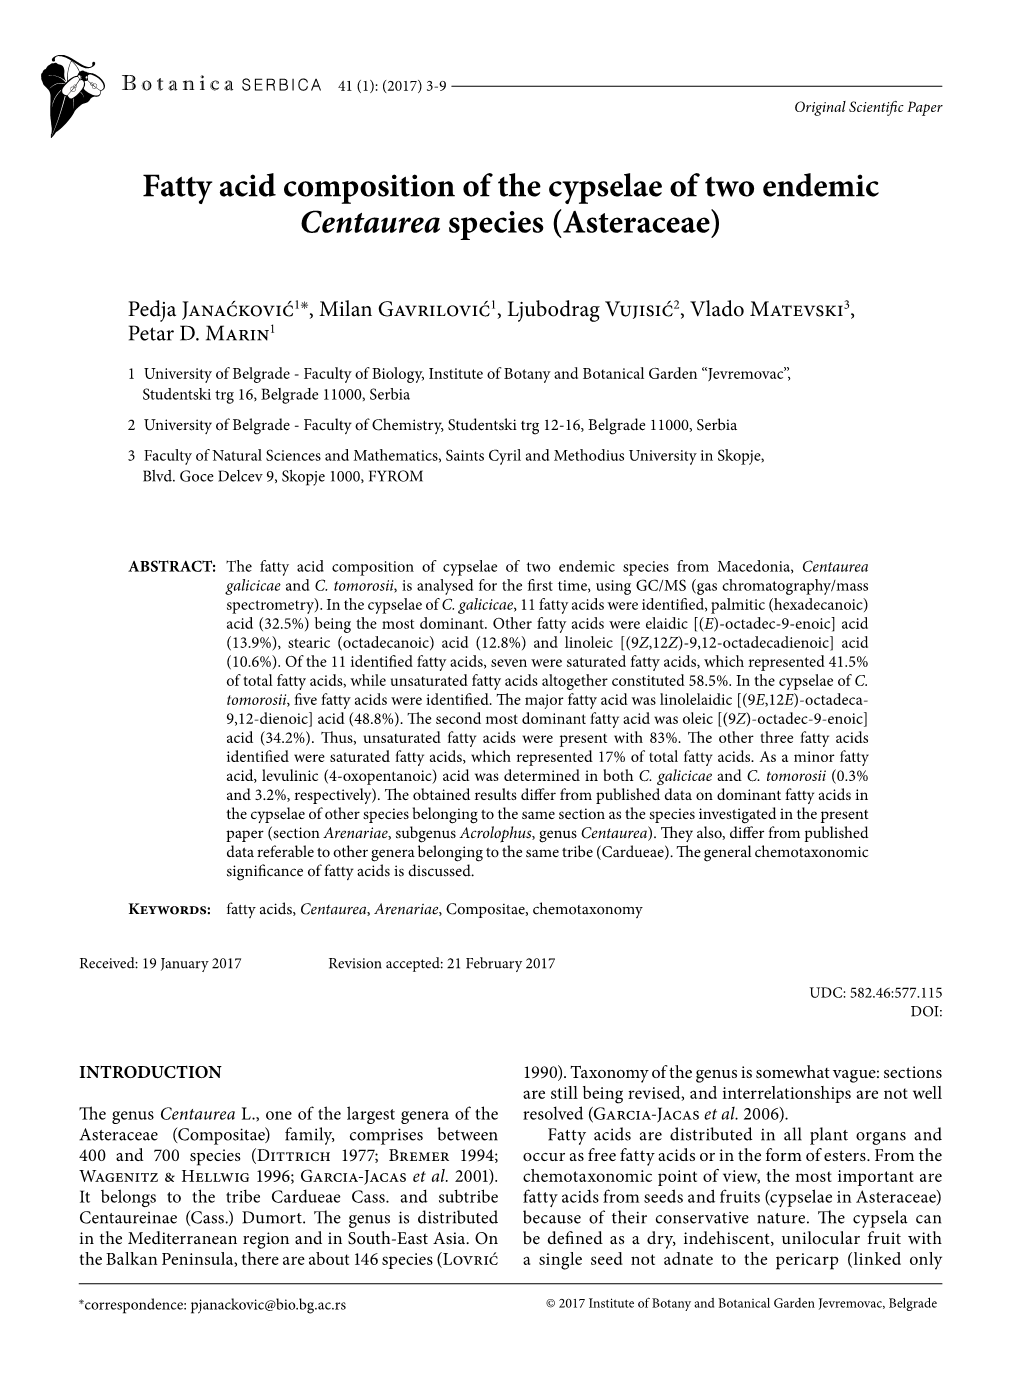 Fatty Acid Composition of the Cypselae of Two Endemic Centaurea Species (Asteraceae)